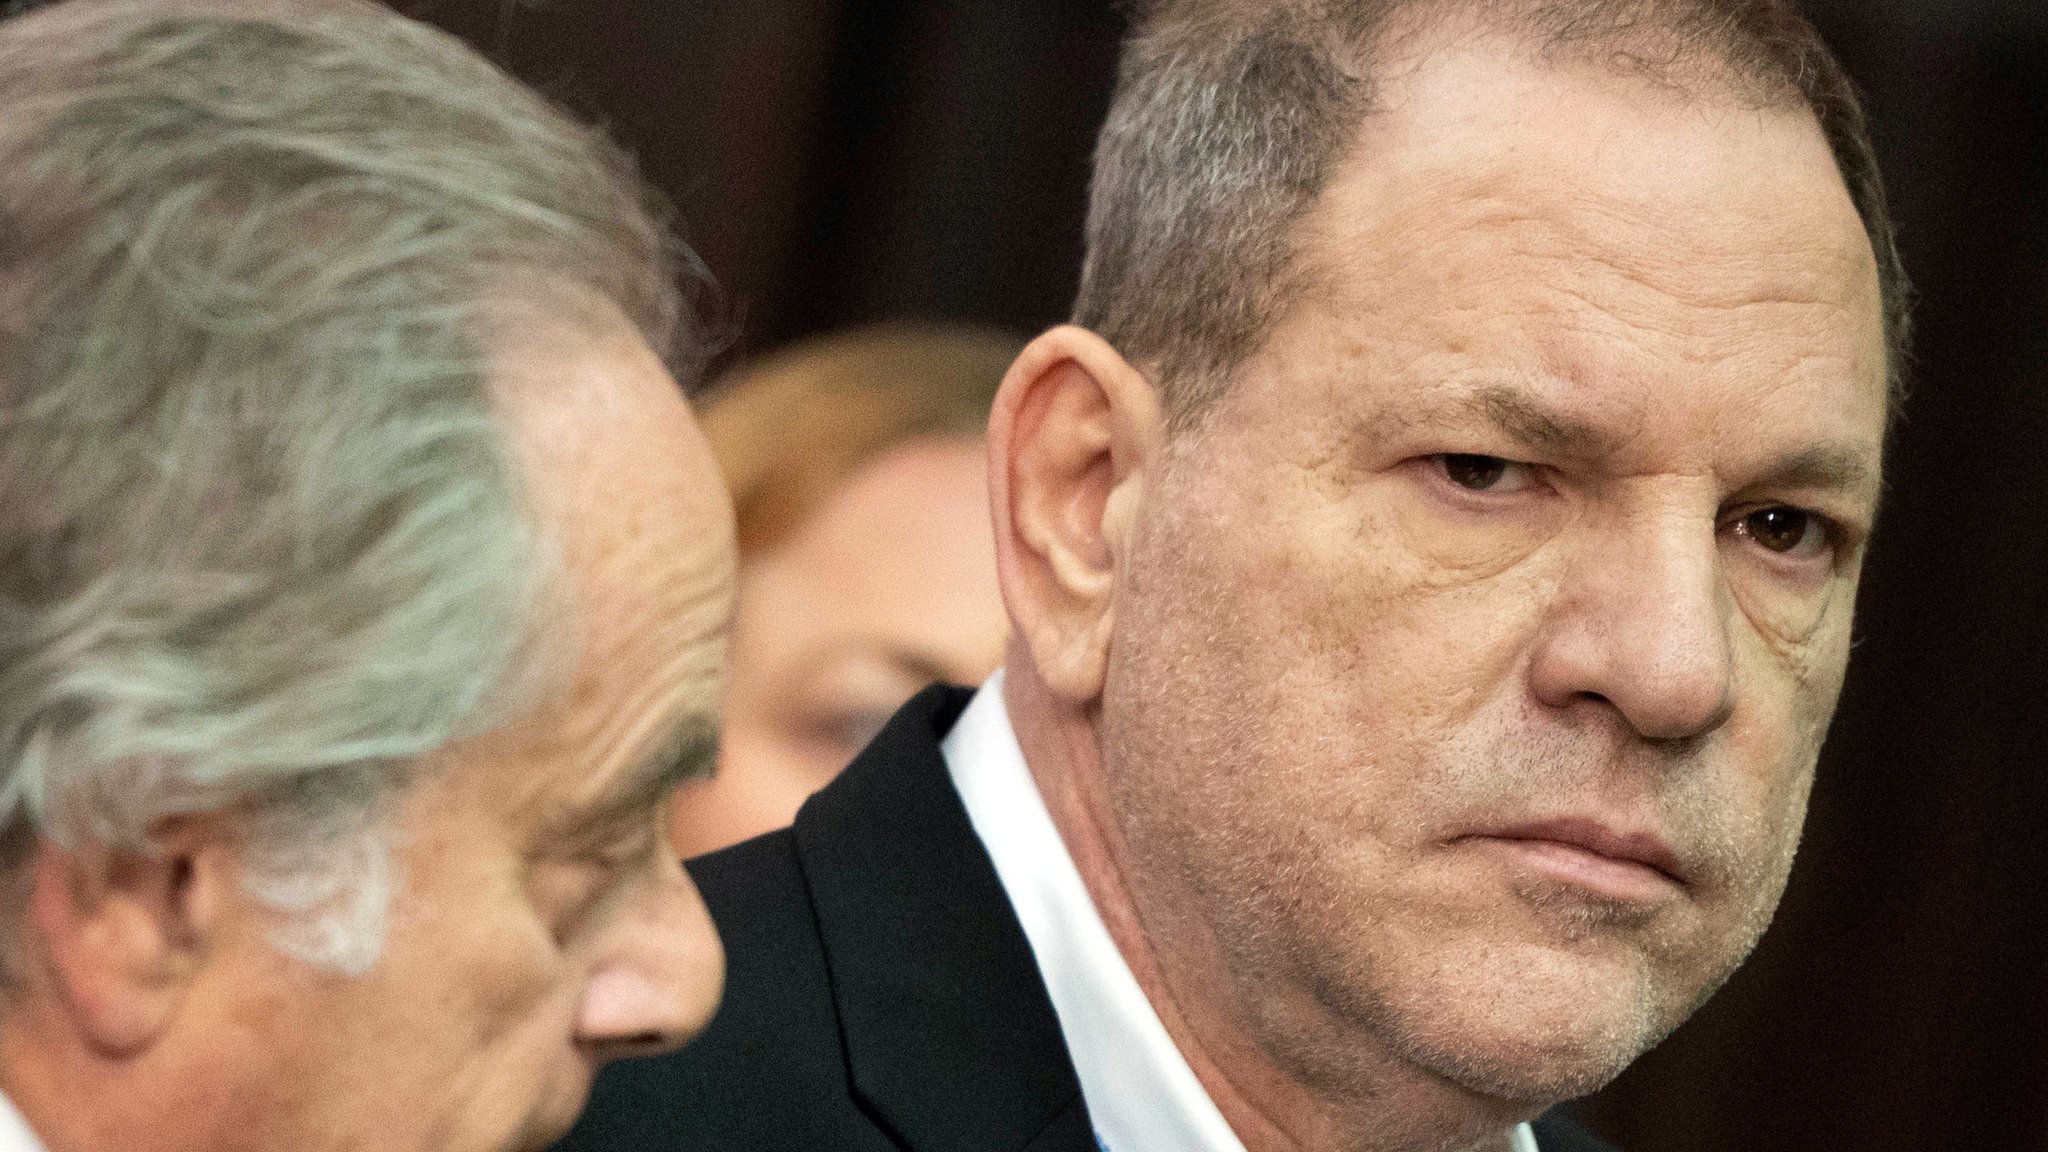 Harvey Weinstein is released on $1M bail over rape and abuse charges